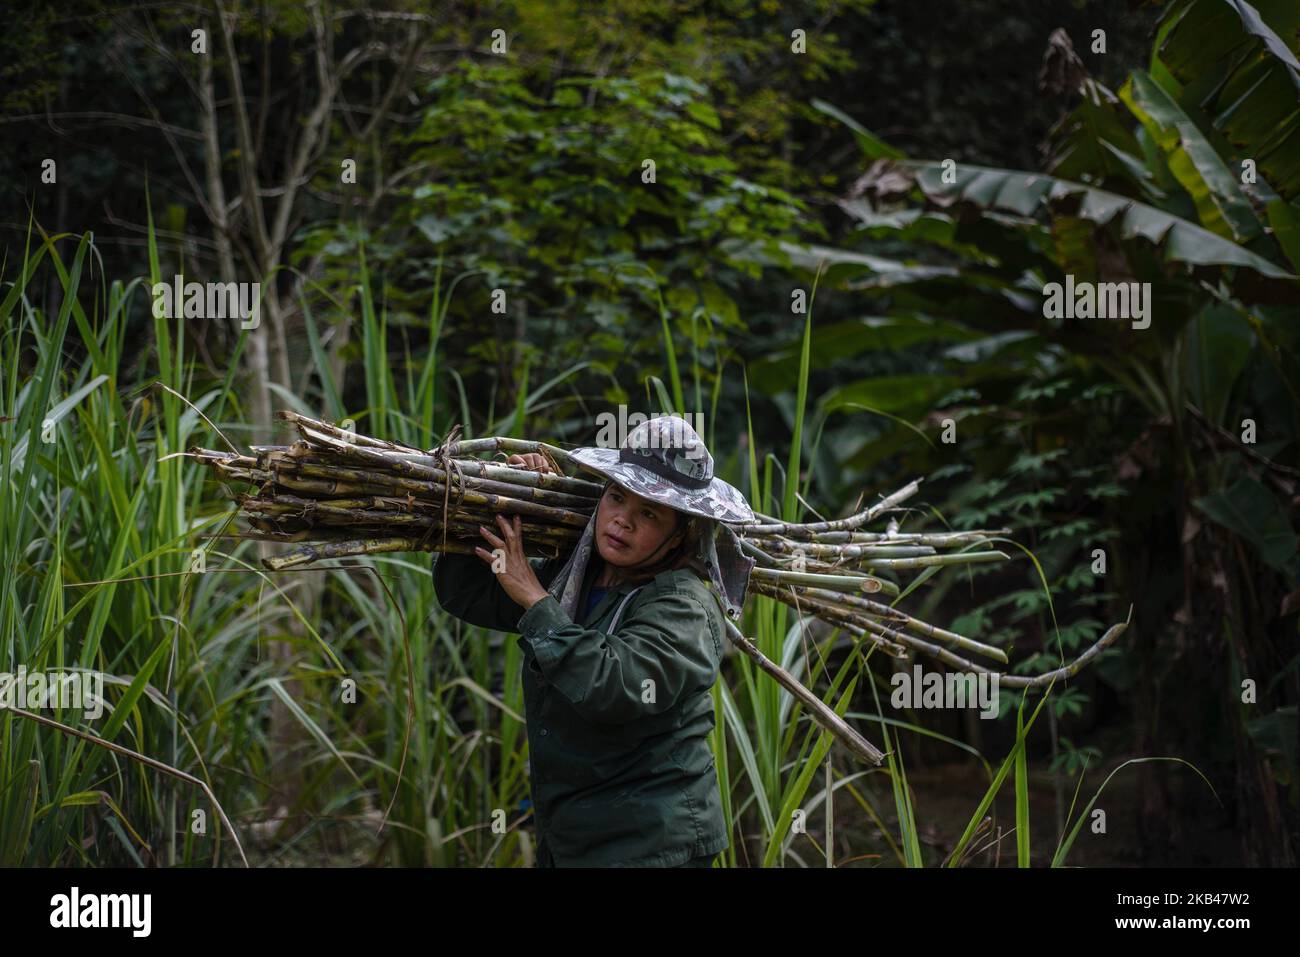 Women gather sugarcane on the farm in the Elephant Conservation Center where elephant food is grown, Sayaboury, Laos, in December 2018. Laos was known as ‘The land of a million elephants’ in the past, today the elephant population in the country stands at around 800 individuals. Half of them is made up of captive elephants, and their number is in decline; the owners are not interested in breeding animals (the cow needs at least four years out of work during her pregnancy and lactation), illegal trafficking to China and other neighboring countries continues. Against this backdrop, the Elephant Stock Photo